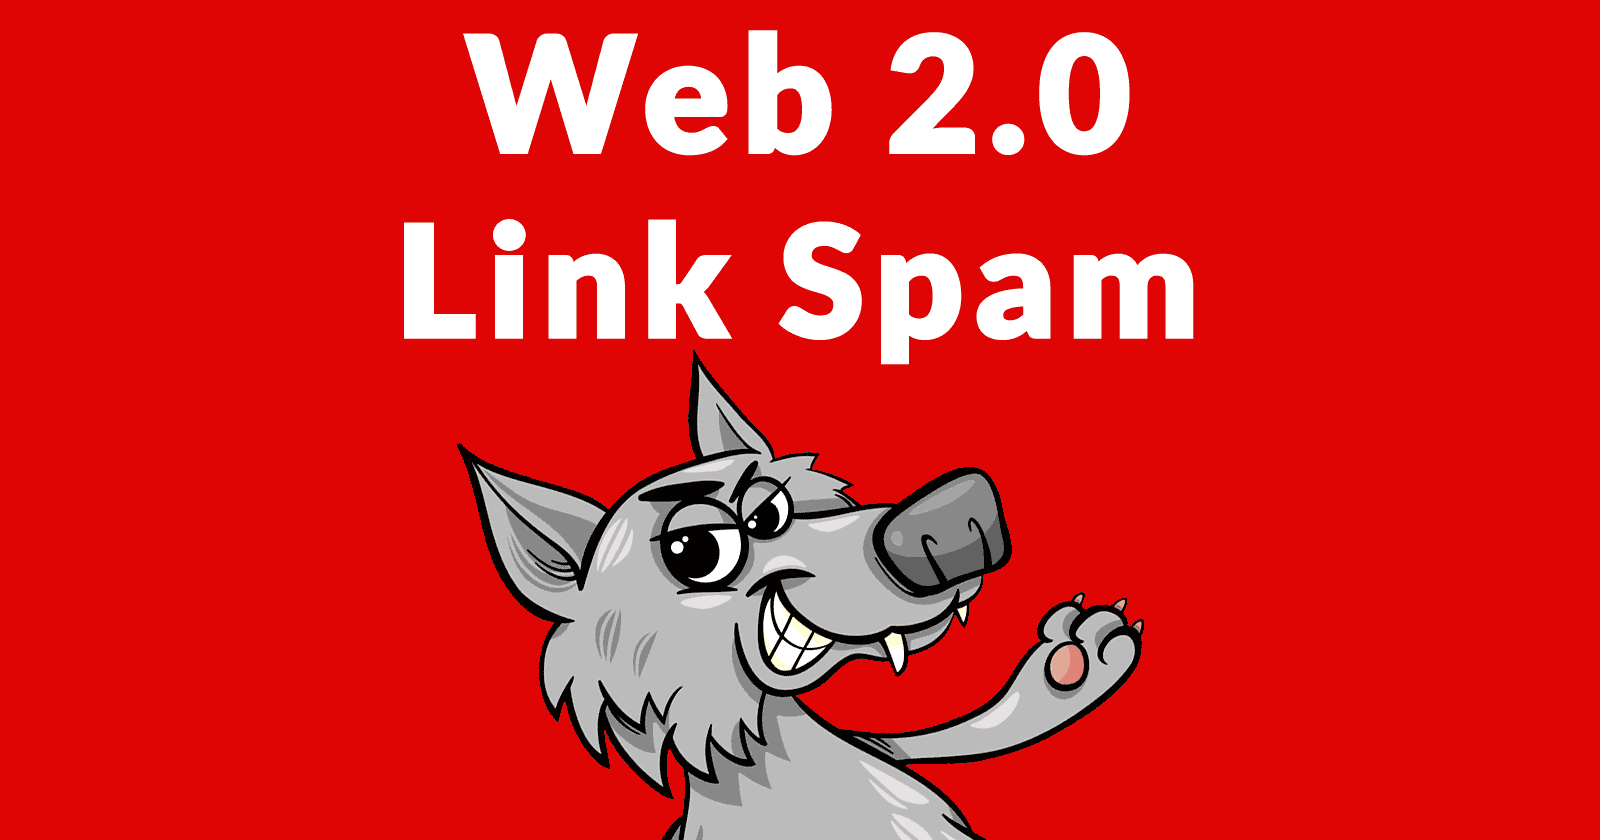 Image of a wolf representing a low quality link spammer and the words Web 2.0 Link Spam